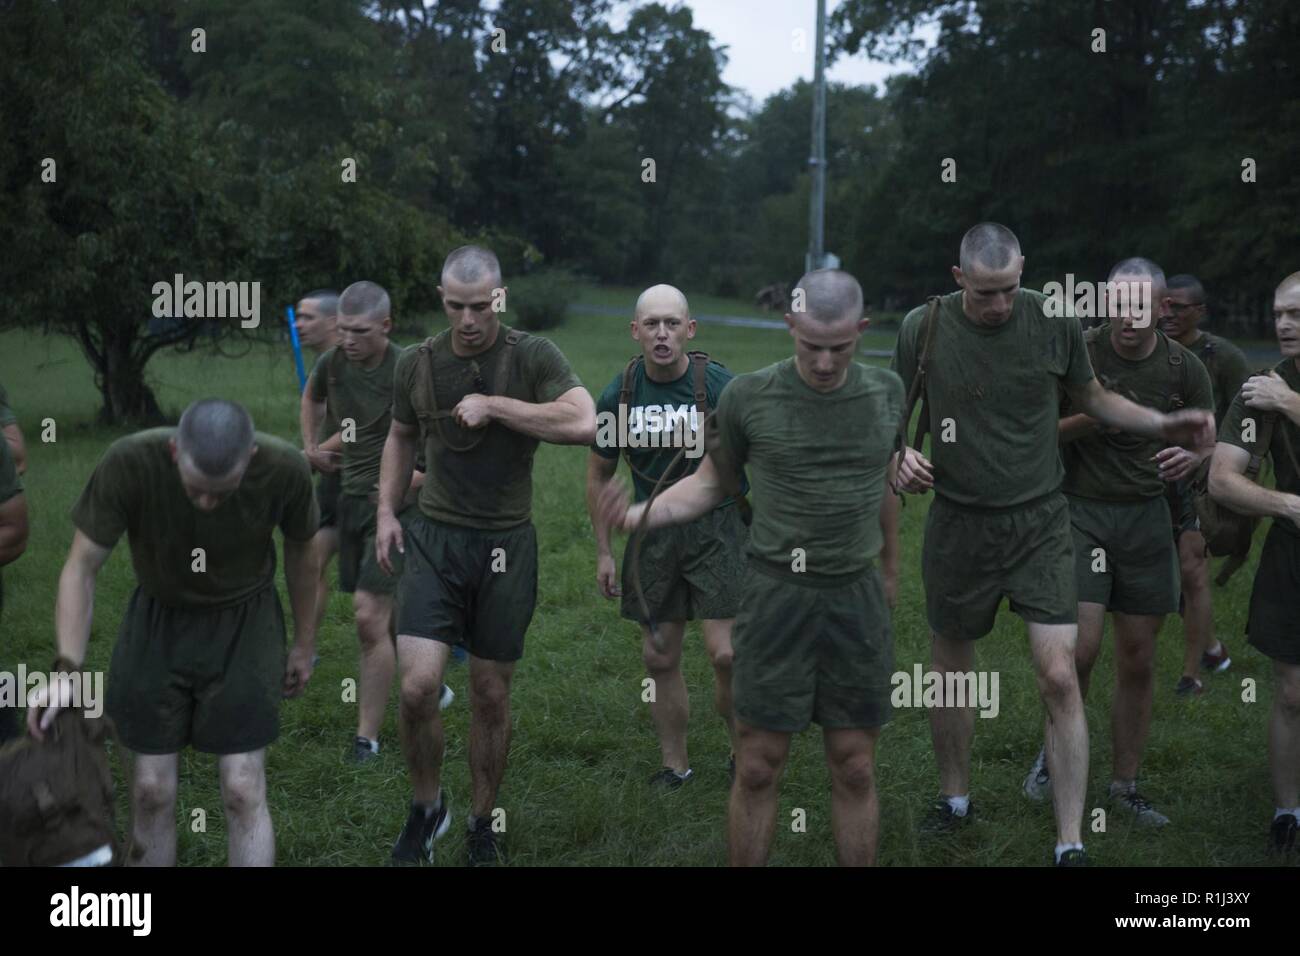 U.S. Marine officer candidates of Charlie and Delta Company, Officer Candidate School (OCS), execute the Muscular Endurance Course, consisting of kettle bell workouts, sit ups, and calisthenics at Quantico, Va. Sept. 23, 2018. Candidates must complete various exercises and tasks to complete the requirements of OCS to become a Marine Commissioned Officer. Stock Photo